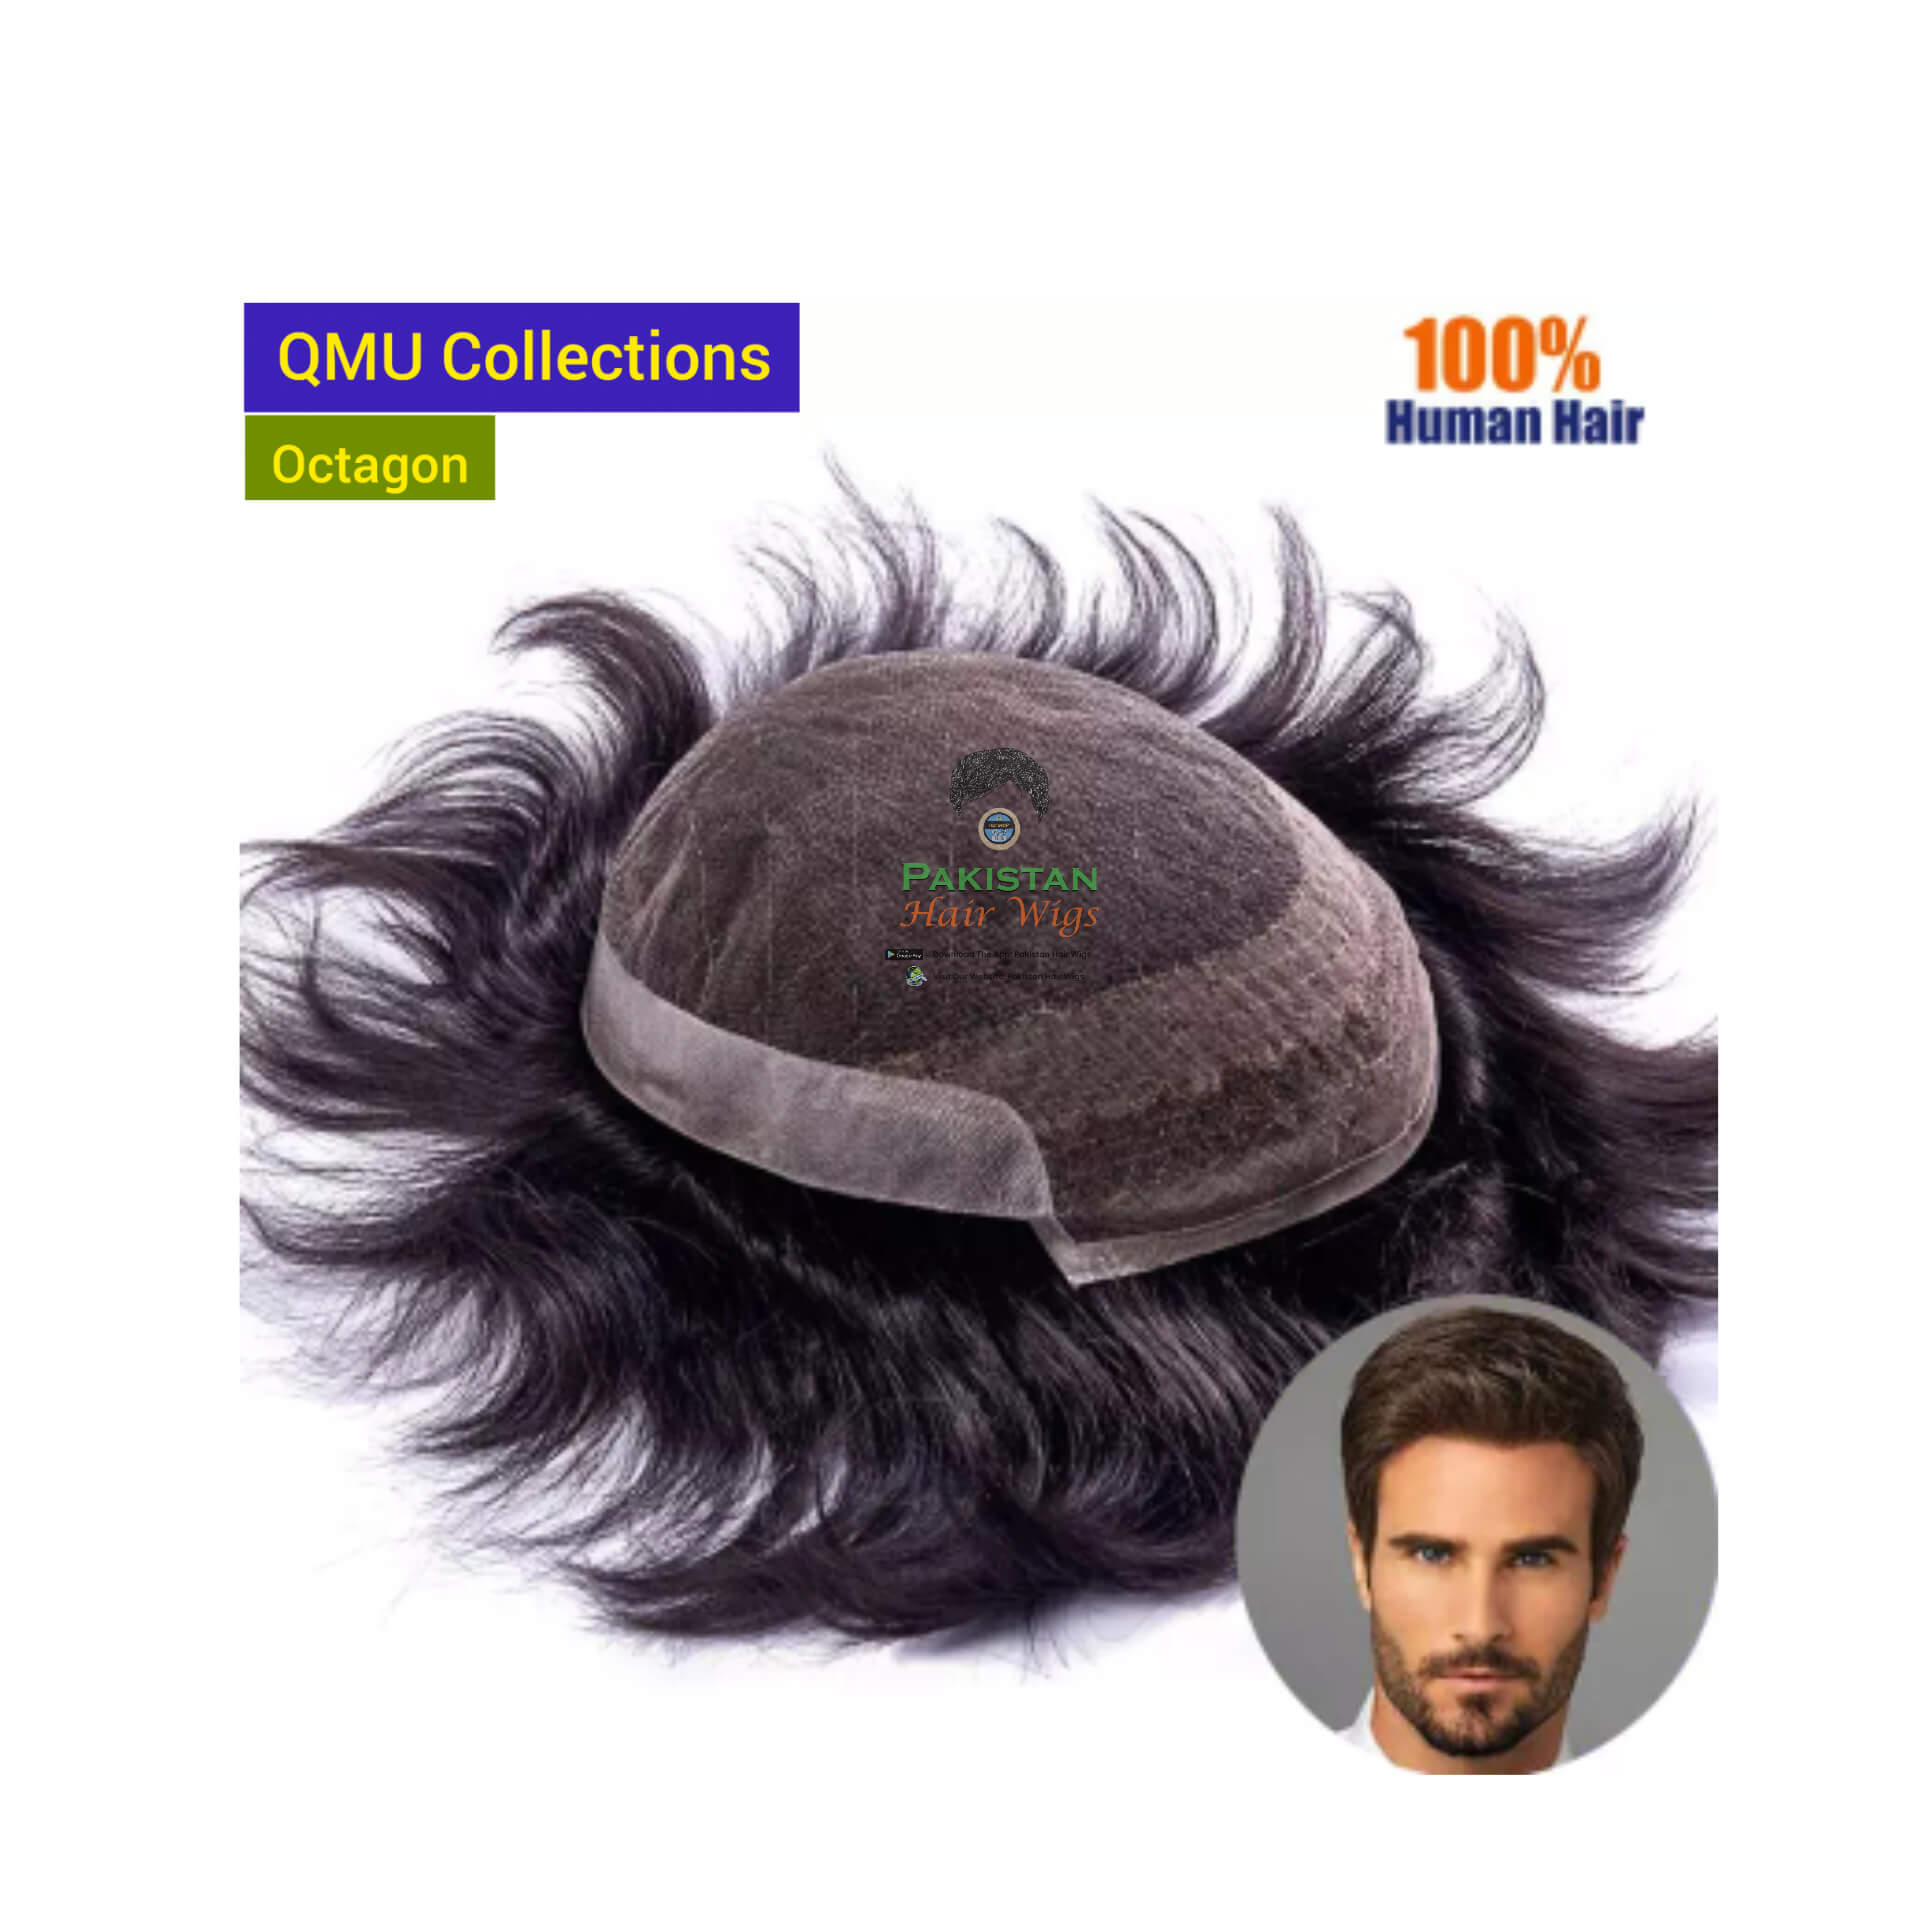 Model: Octagon Hair System (Series OCT1873) - (China), Human Hair System - Pakistan  Hair Wigs